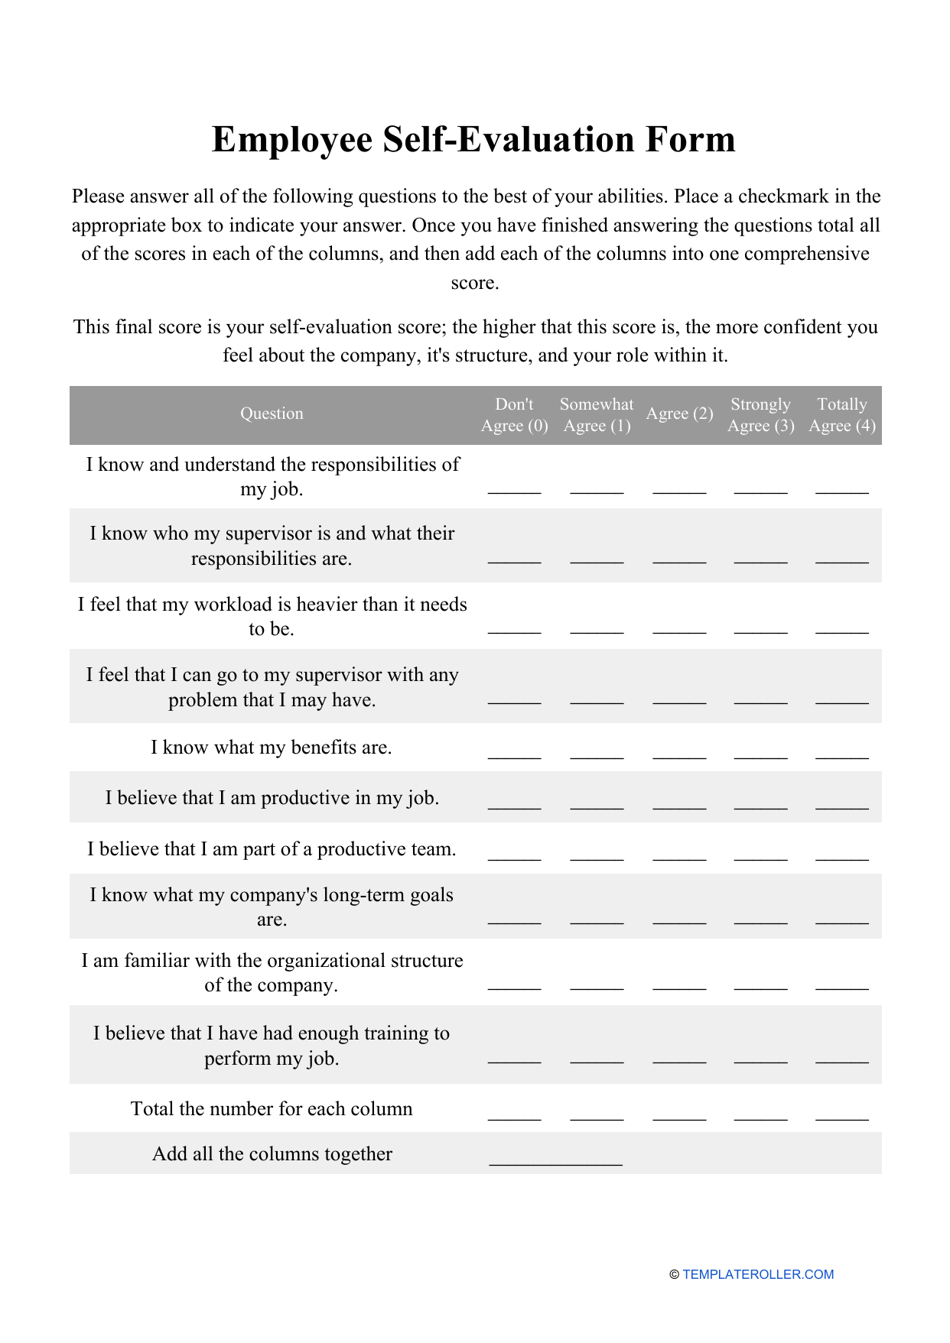 Employee Self Evaluation Form Download Printable PDF Templateroller